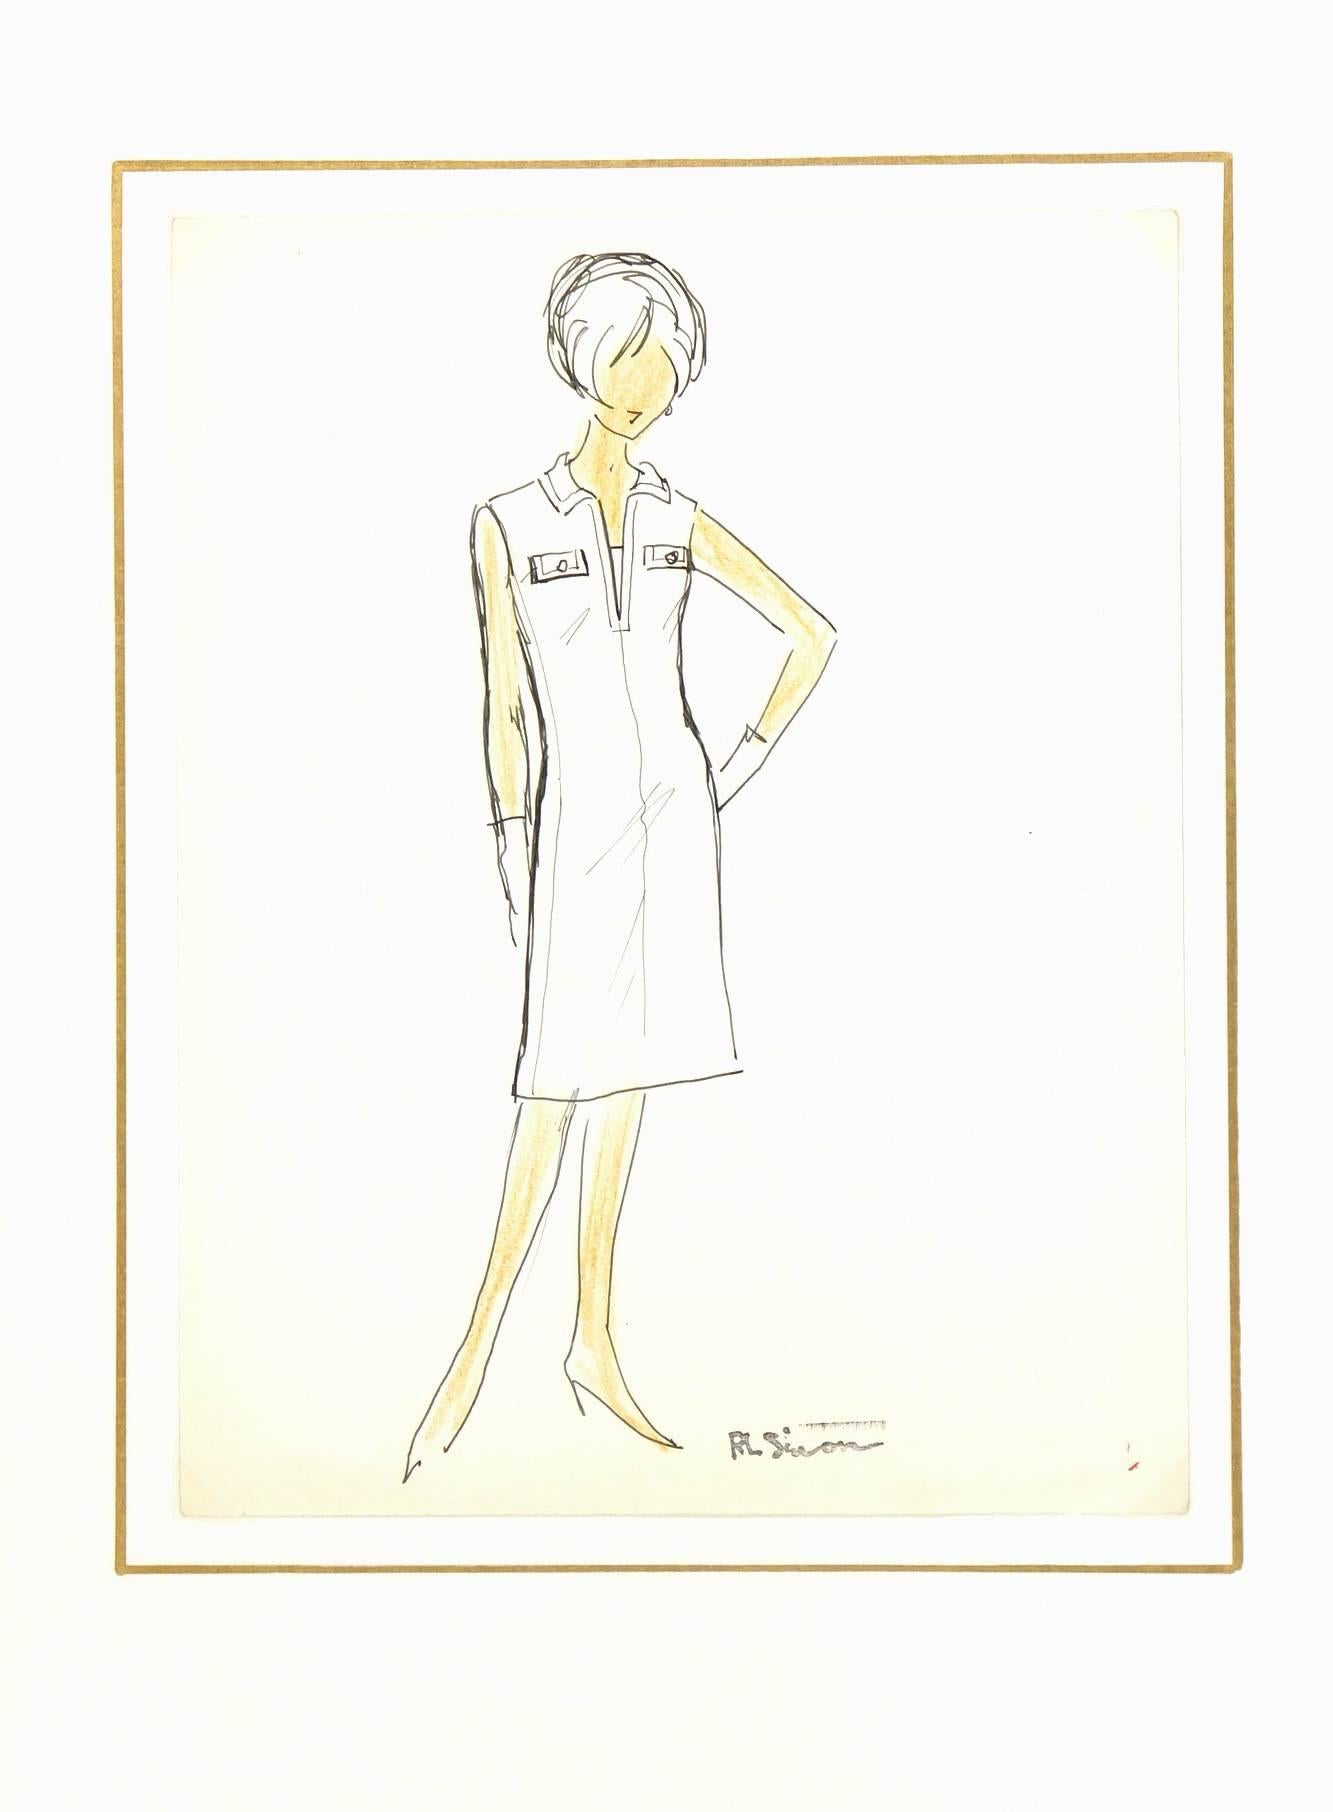 Vintage French Pen & Ink Fashion Sketch - Slim Fit Dress - White Figurative Art by Unknown